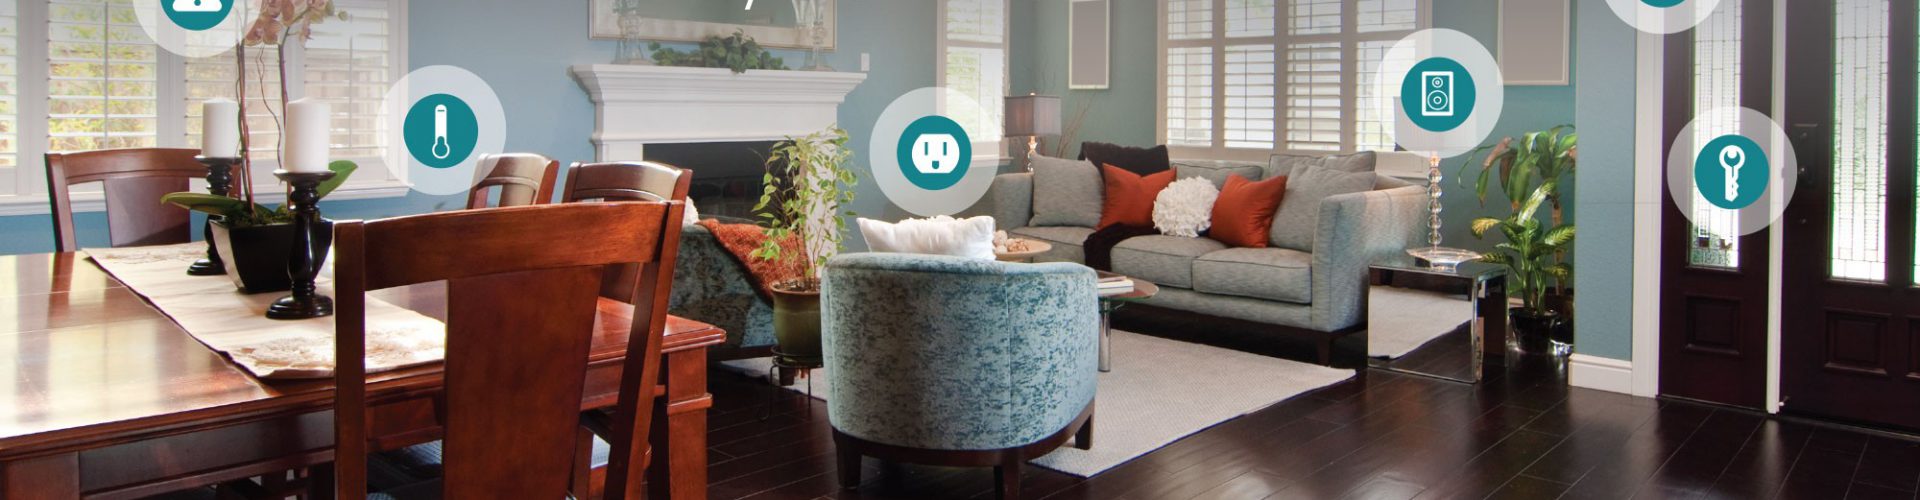 Easy Smarthome Devices to Increase Your Homes Value